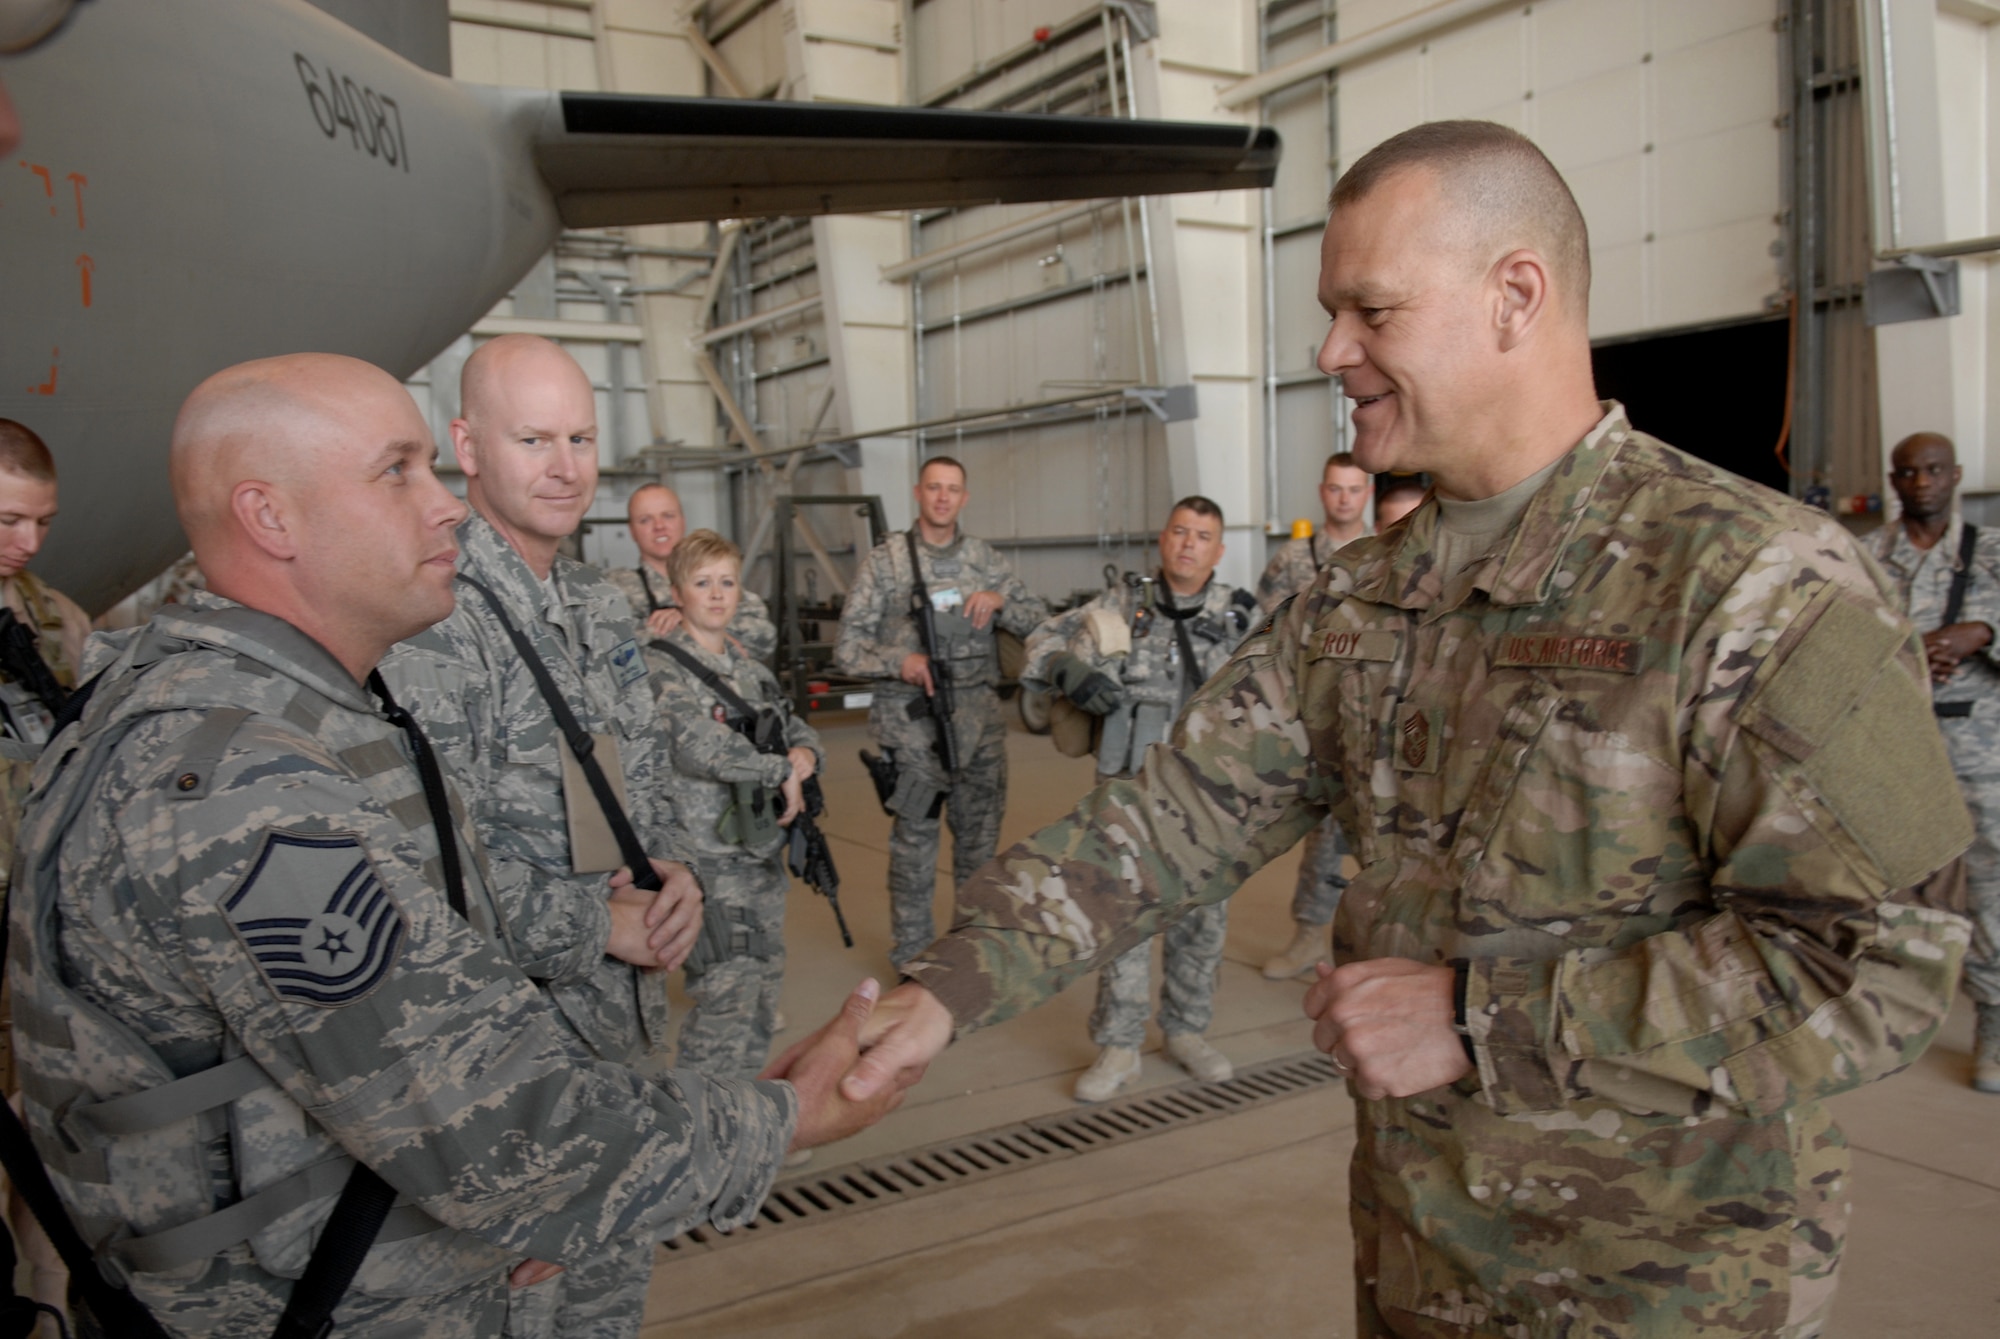 Chief Master Sgt. of the Air Force James A. Roy visits with Airmen from the 438th Air Expeditionary Wing June 17, 2011, at the Afghan air force compound in Kabul, Afghanistan. (U.S. Air Force photo/Tech. Sgt. Brian E. Christiansen)